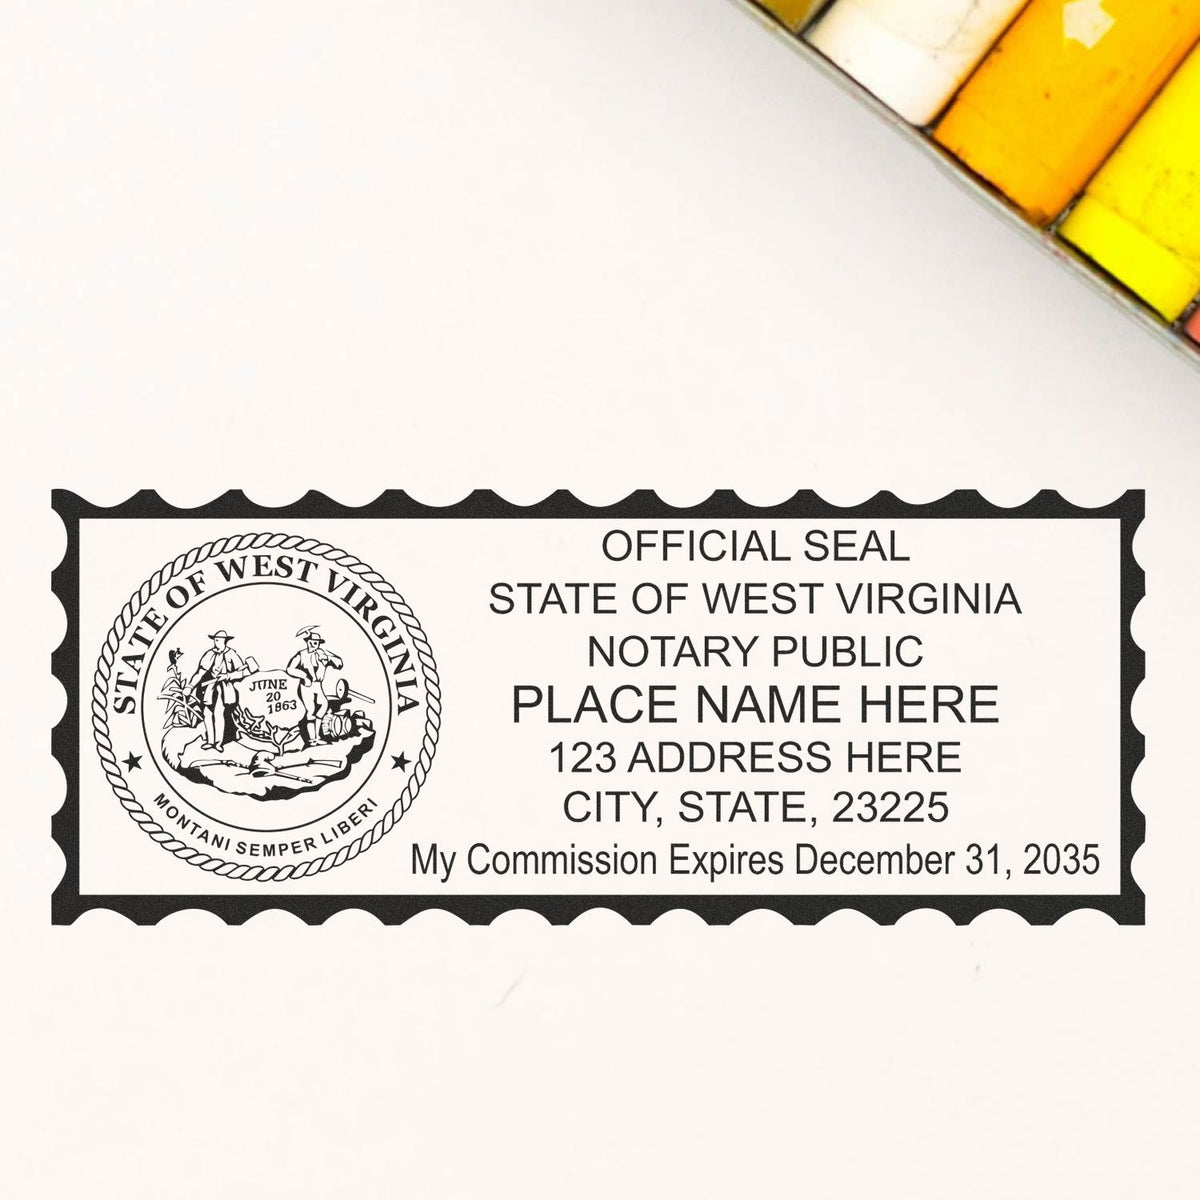 An alternative view of the PSI West Virginia Notary Stamp stamped on a sheet of paper showing the image in use